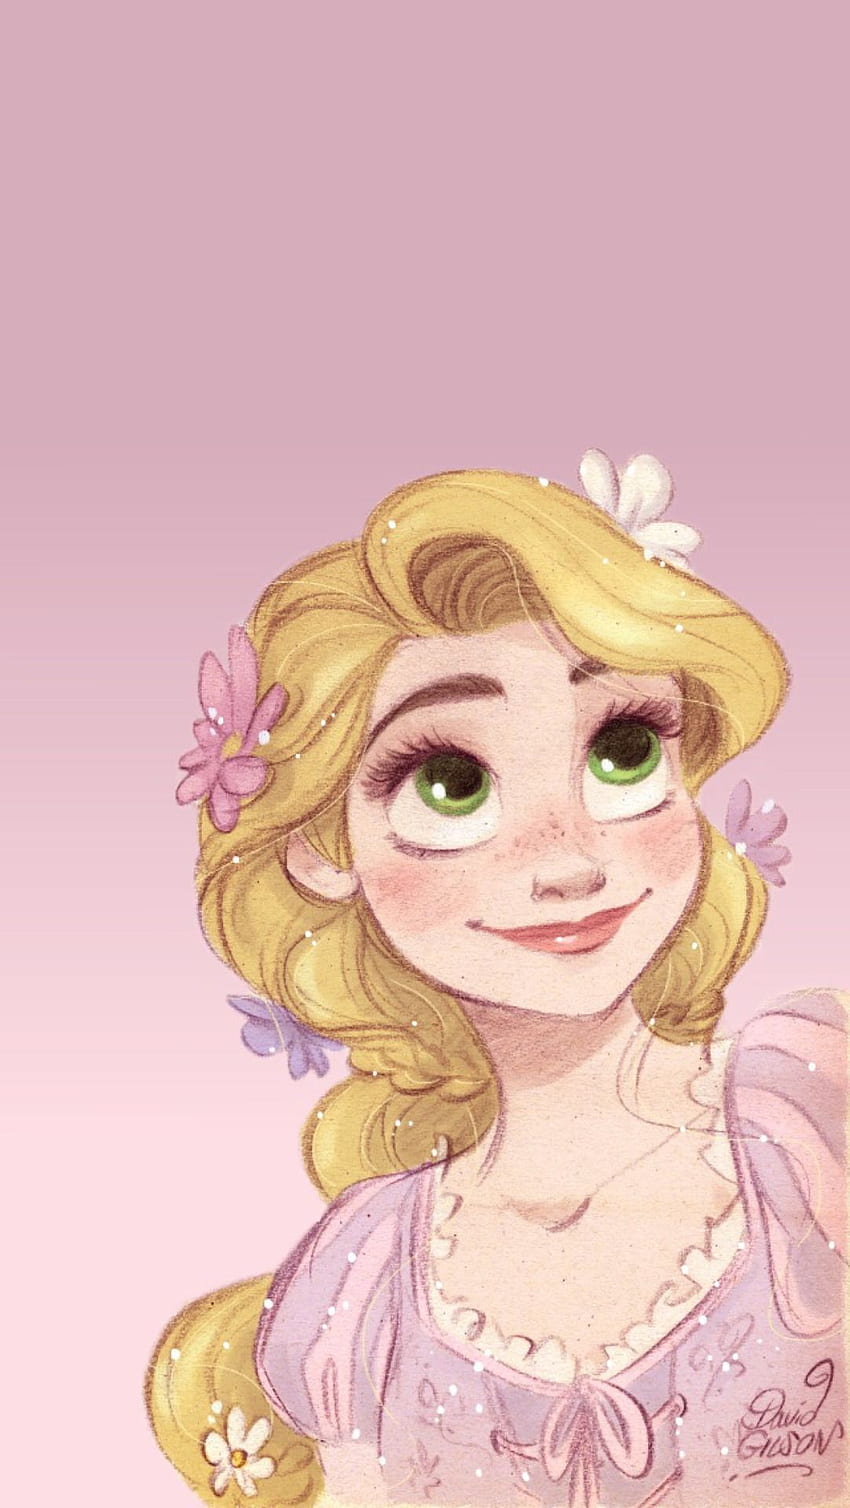 How to Draw Rapunzel from Tangled - Really Easy Drawing Tutorial